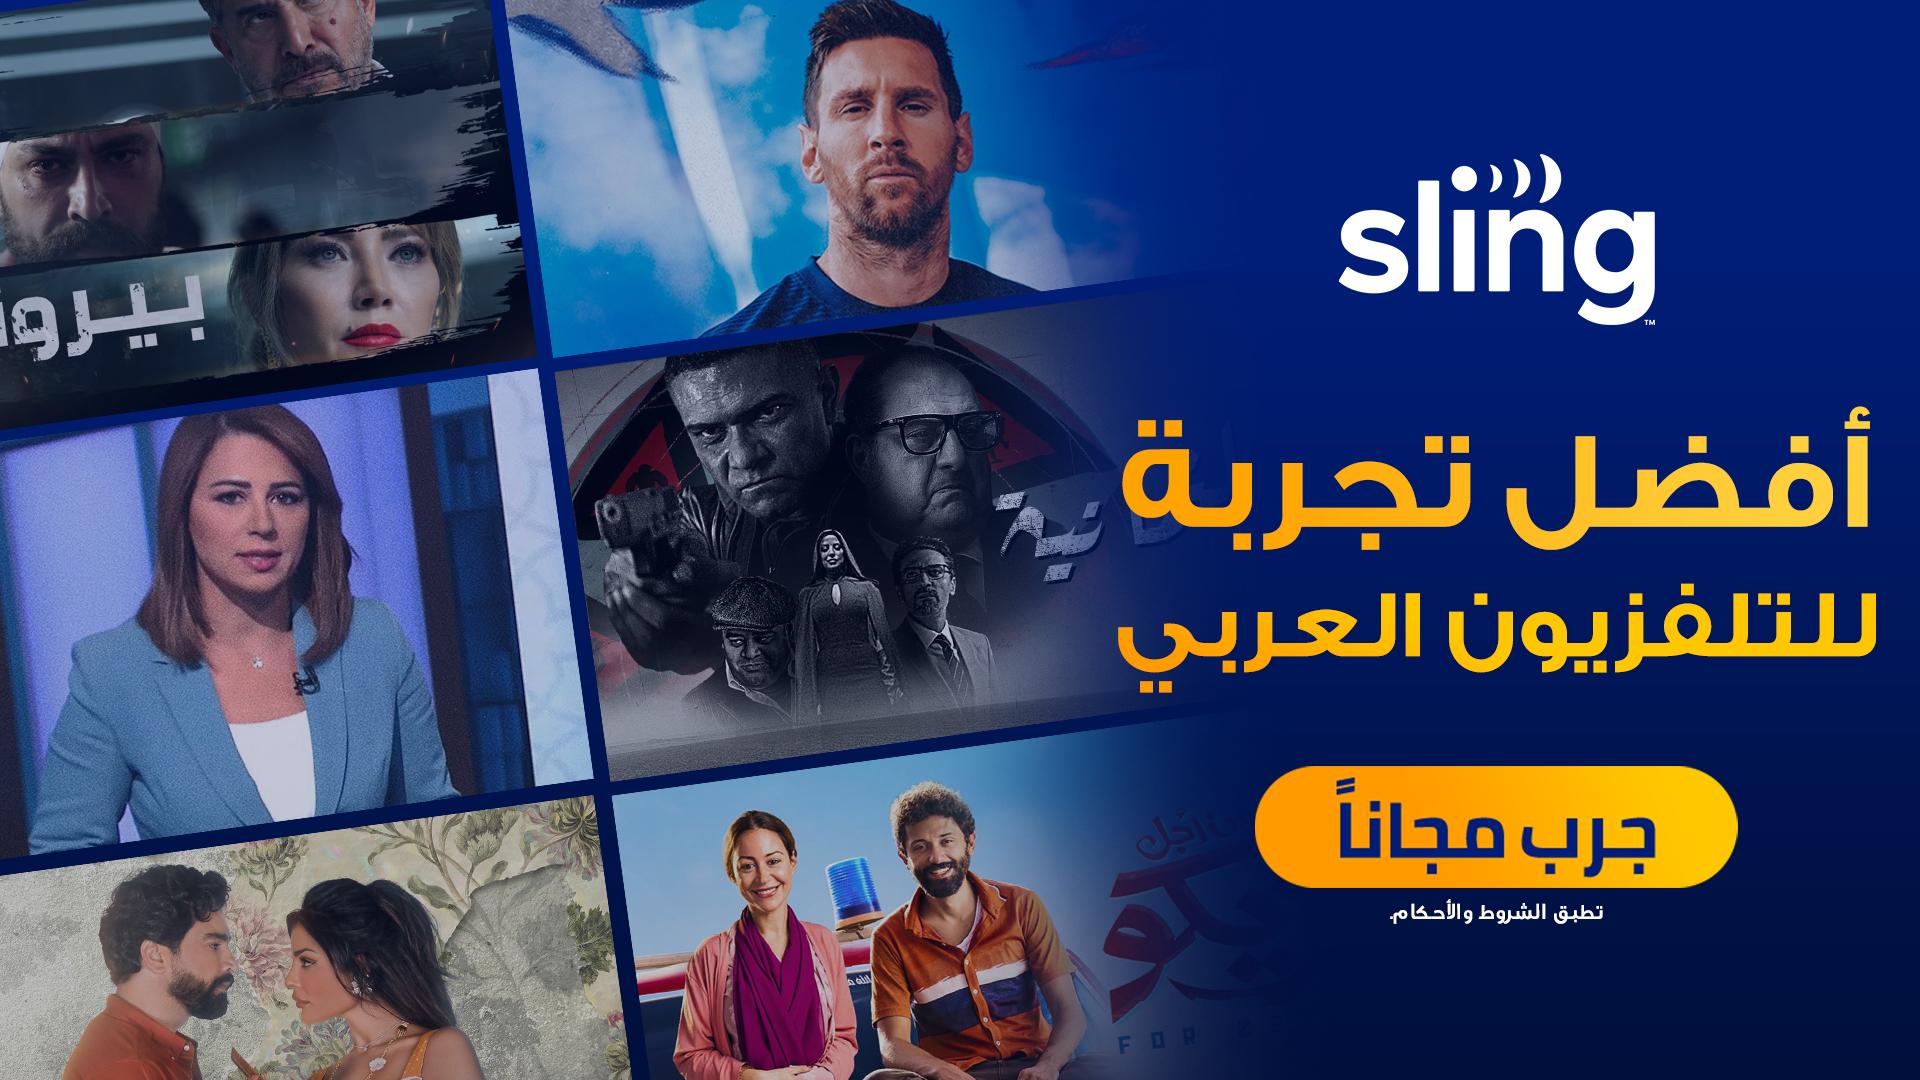 Al Jazeera Re-Launches on Arab Streaming Service Sling for US Audiences Egyptian Streets